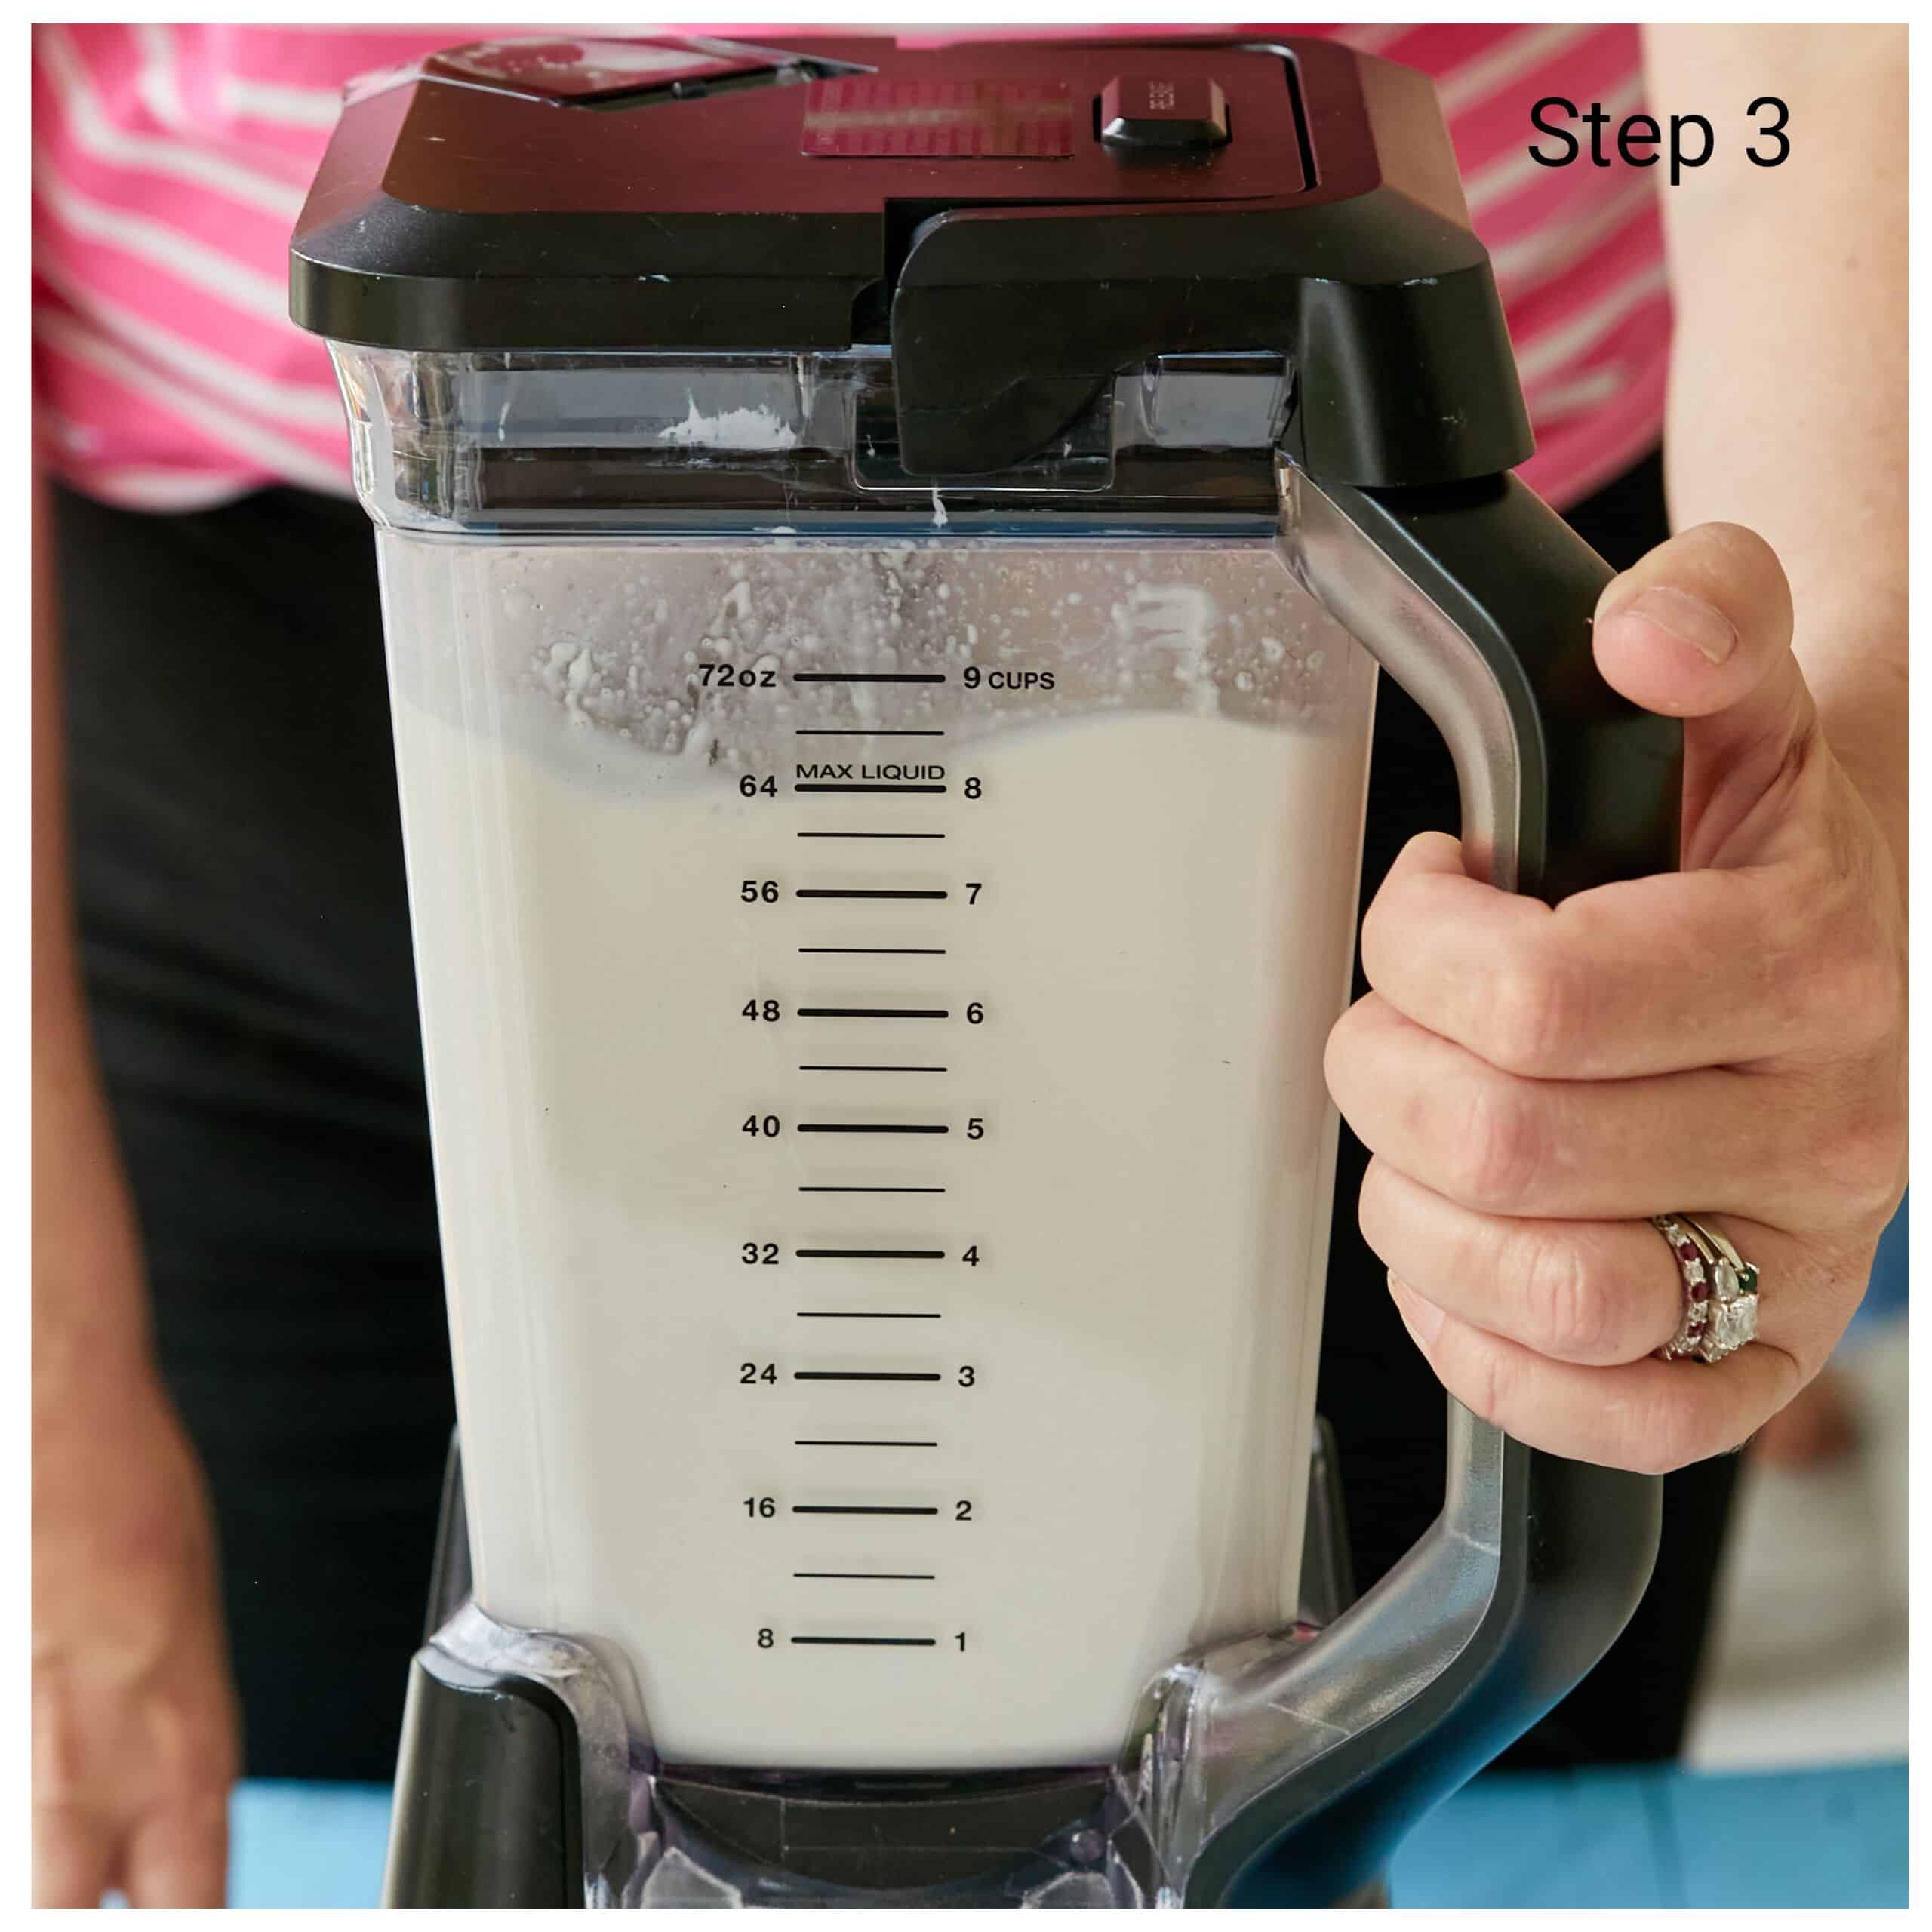 Step-by-step instructions on how to make Strawberry Cheesecake Ice Cream, step3: In a food processor or blender, mix cream cheese, milk, cream, sugar, Rodelle Gourmet Vanilla Extract, salt, and remaining 1 tablespoon of lemon juice until smooth.